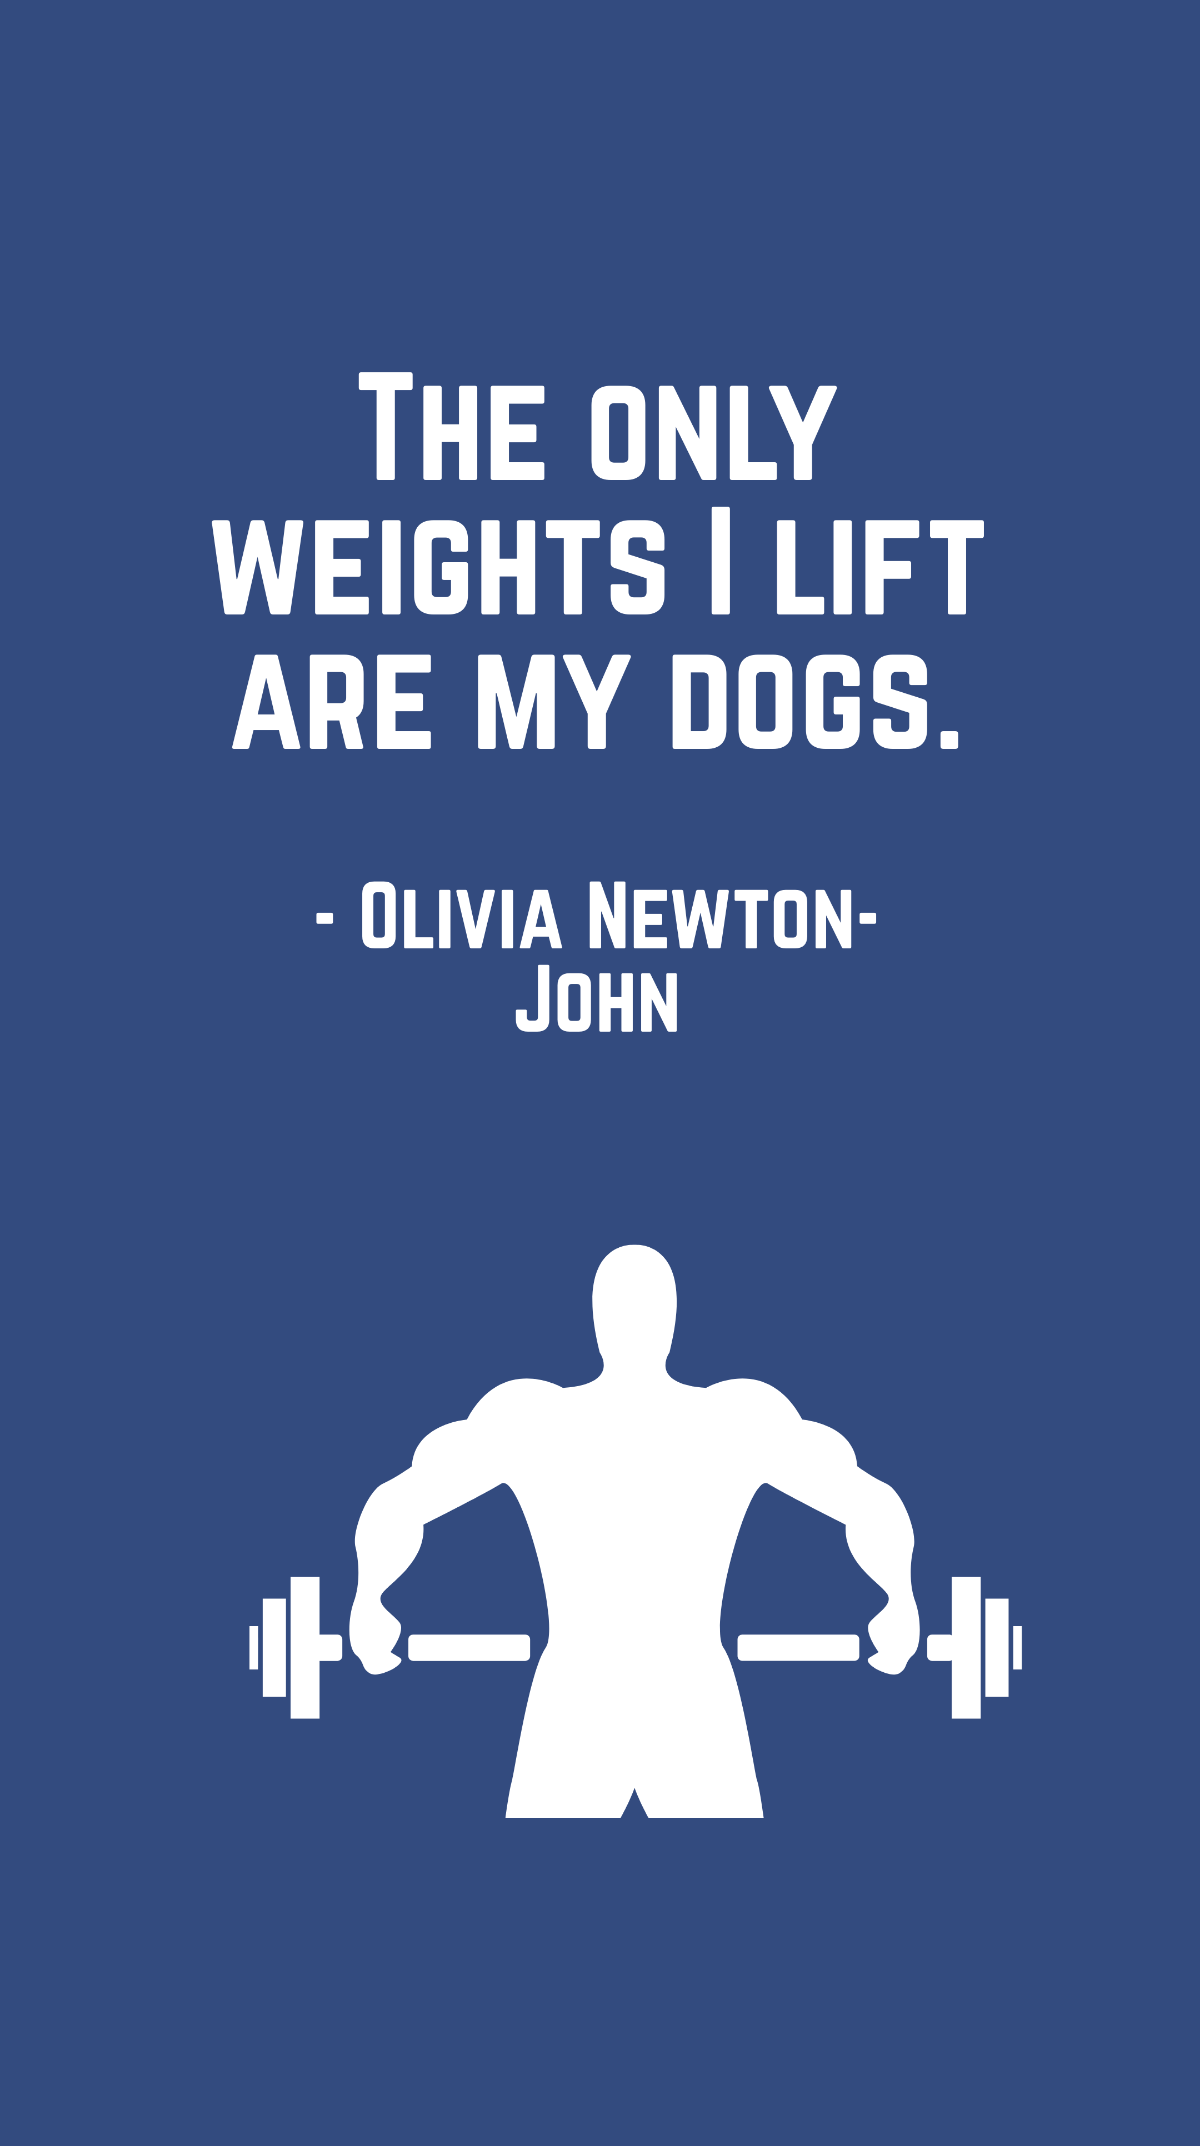 Olivia Newton-John - The only weights I lift are my dogs.